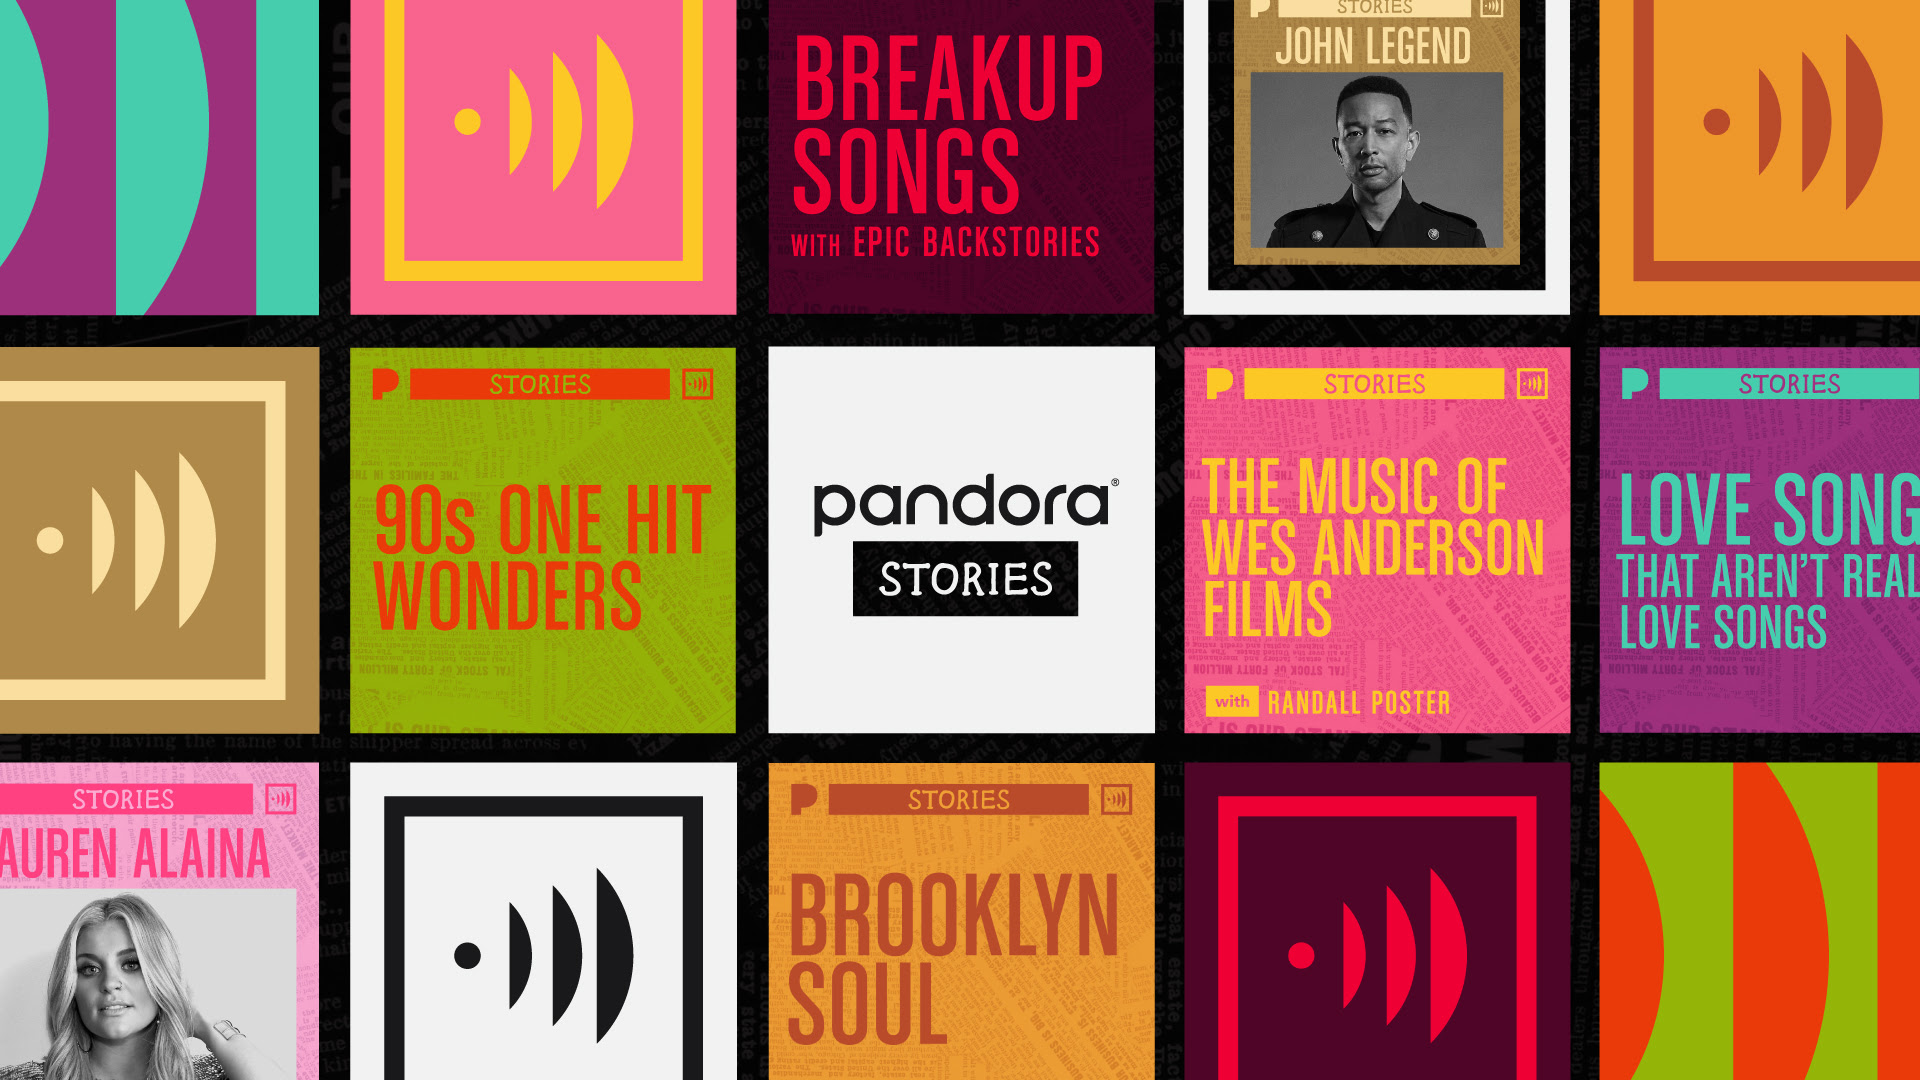 Pandora Stories let you tell your own tale through playlists